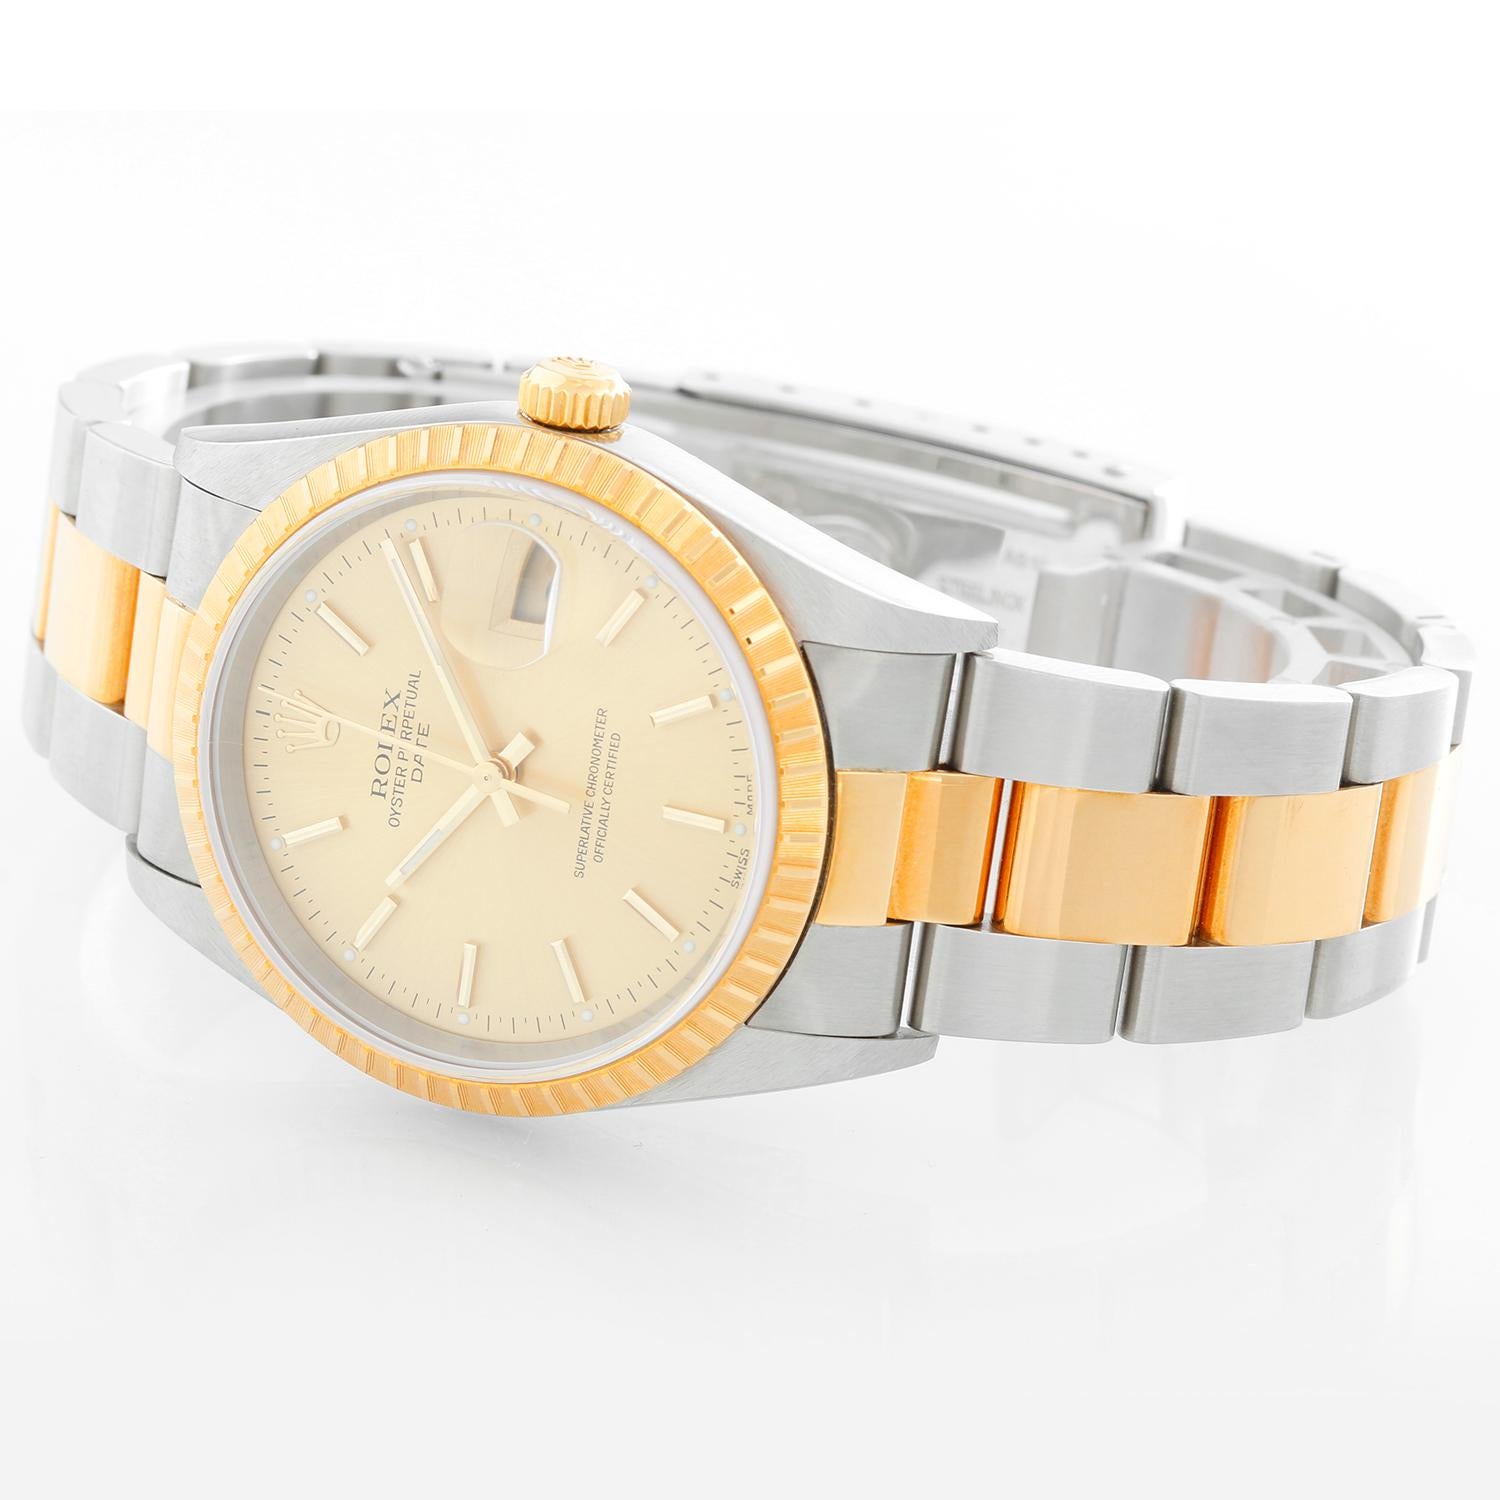 Rolex 2-Tone Steel Gold 34mm Date Men's/Ladies Watch 15223- Automatic winding, Quickset, sapphire crystal. Stainless steel case with yellow gold fluted bezel (34mm diameter). Champagne dial with stick markers. Stainless steel and 18k yellow gold